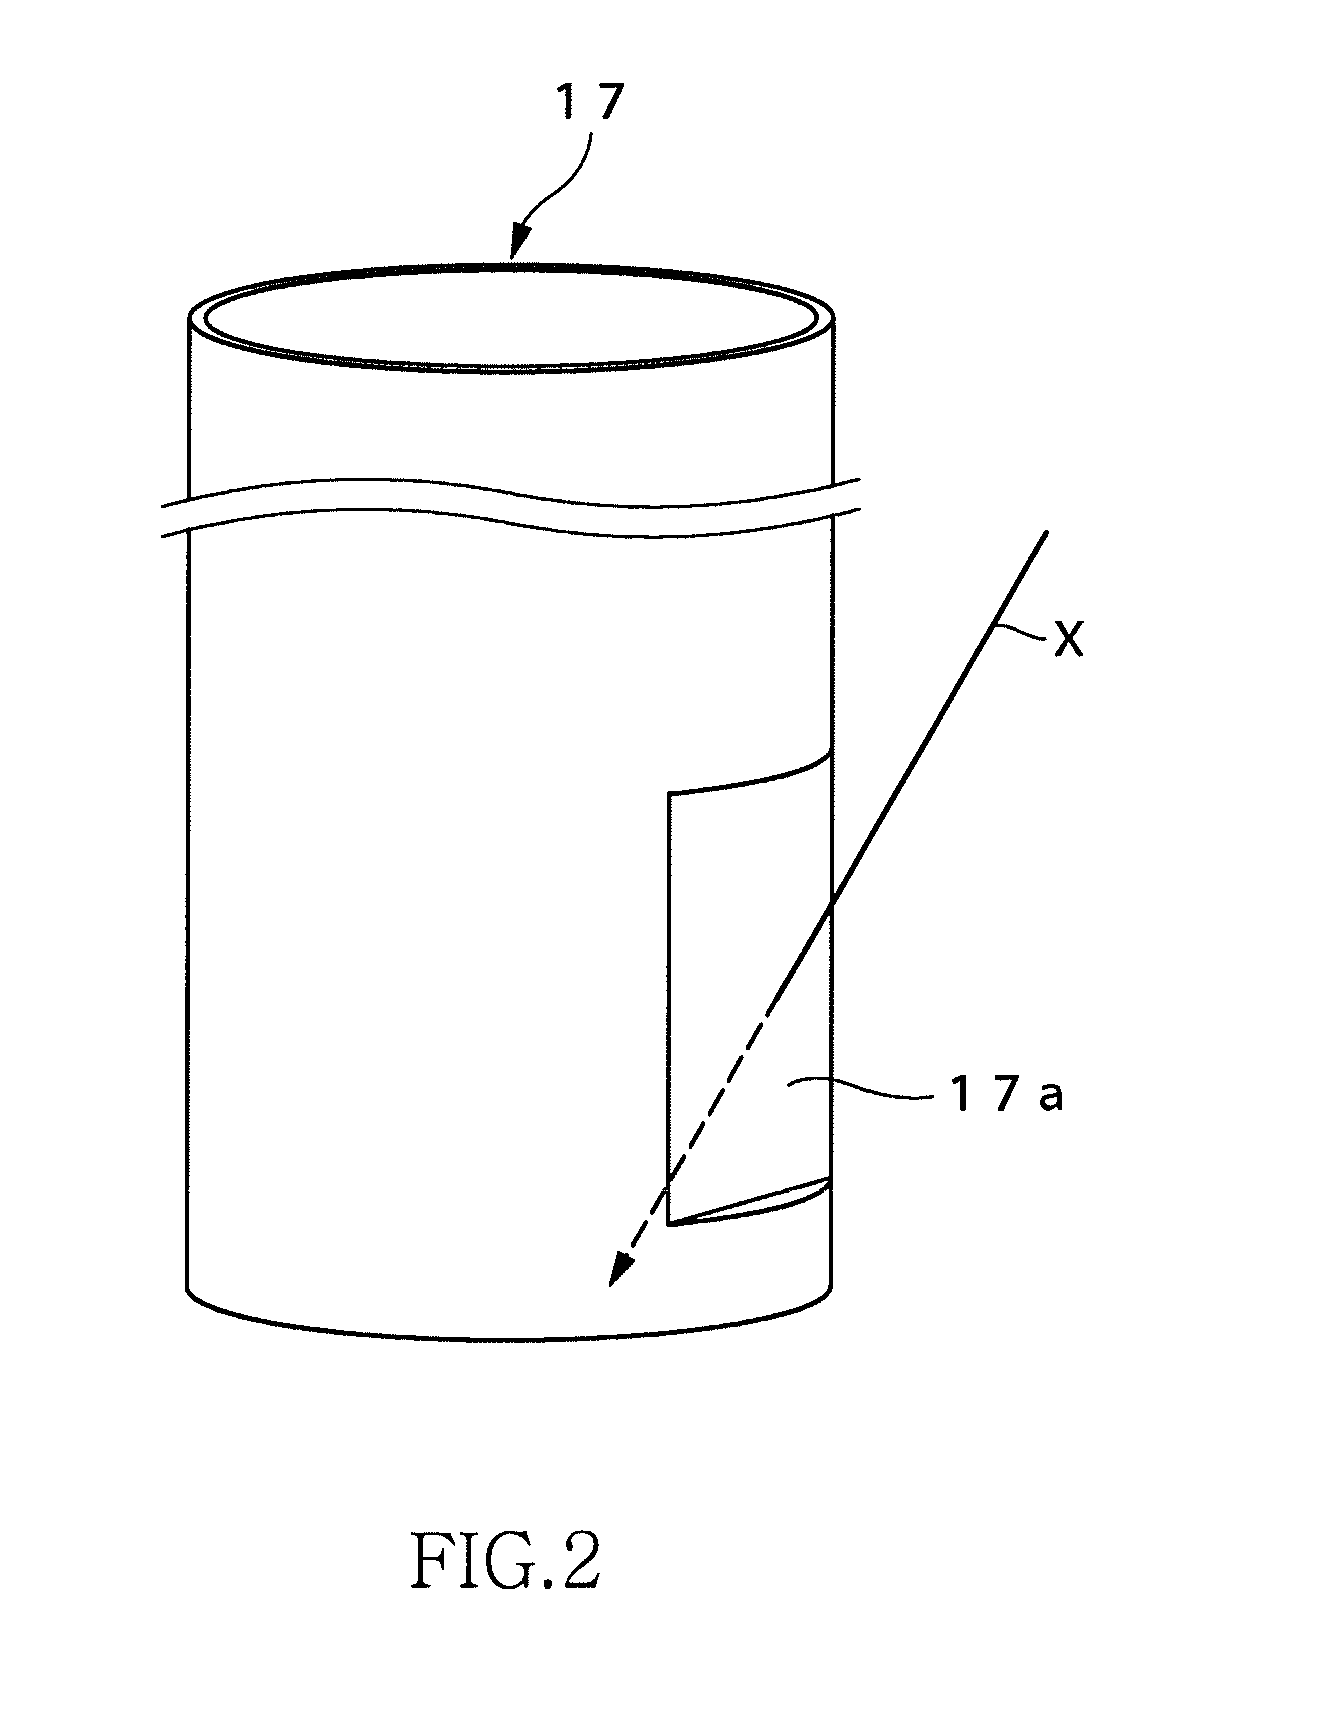 Silicon single crystal pull-up apparatus and method of manufacturing silicon single crystal